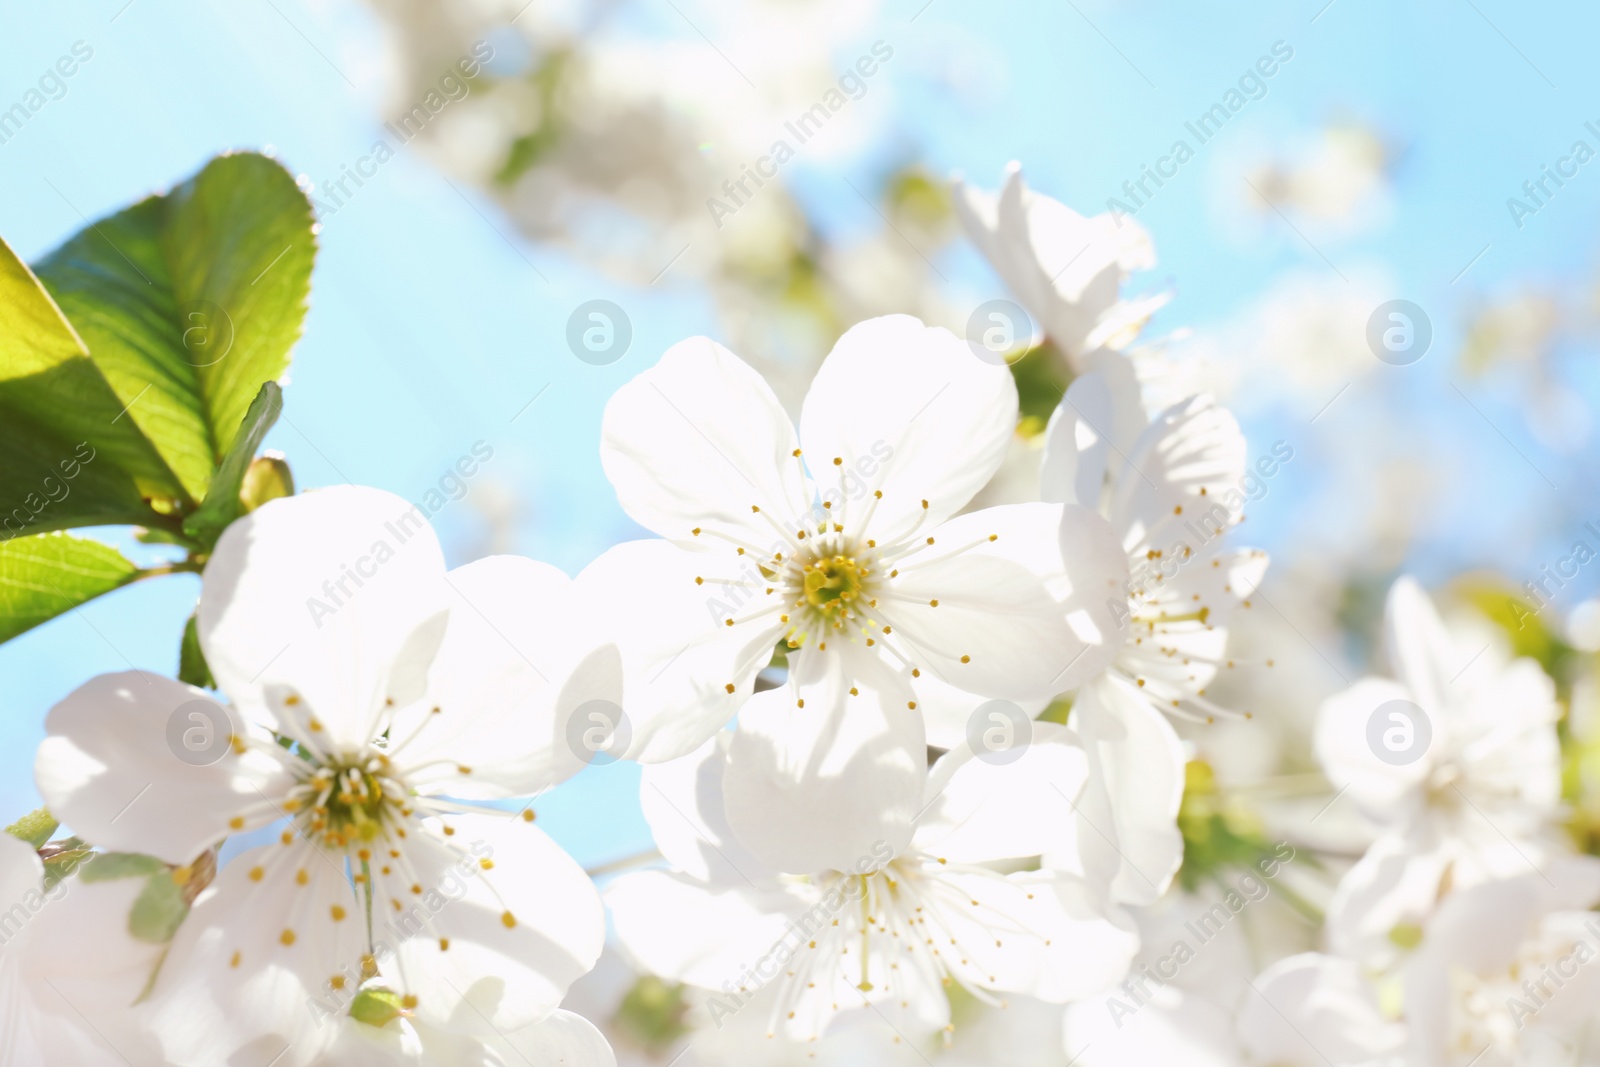 Photo of Branch of beautiful blossoming tree on sunny spring day outdoors